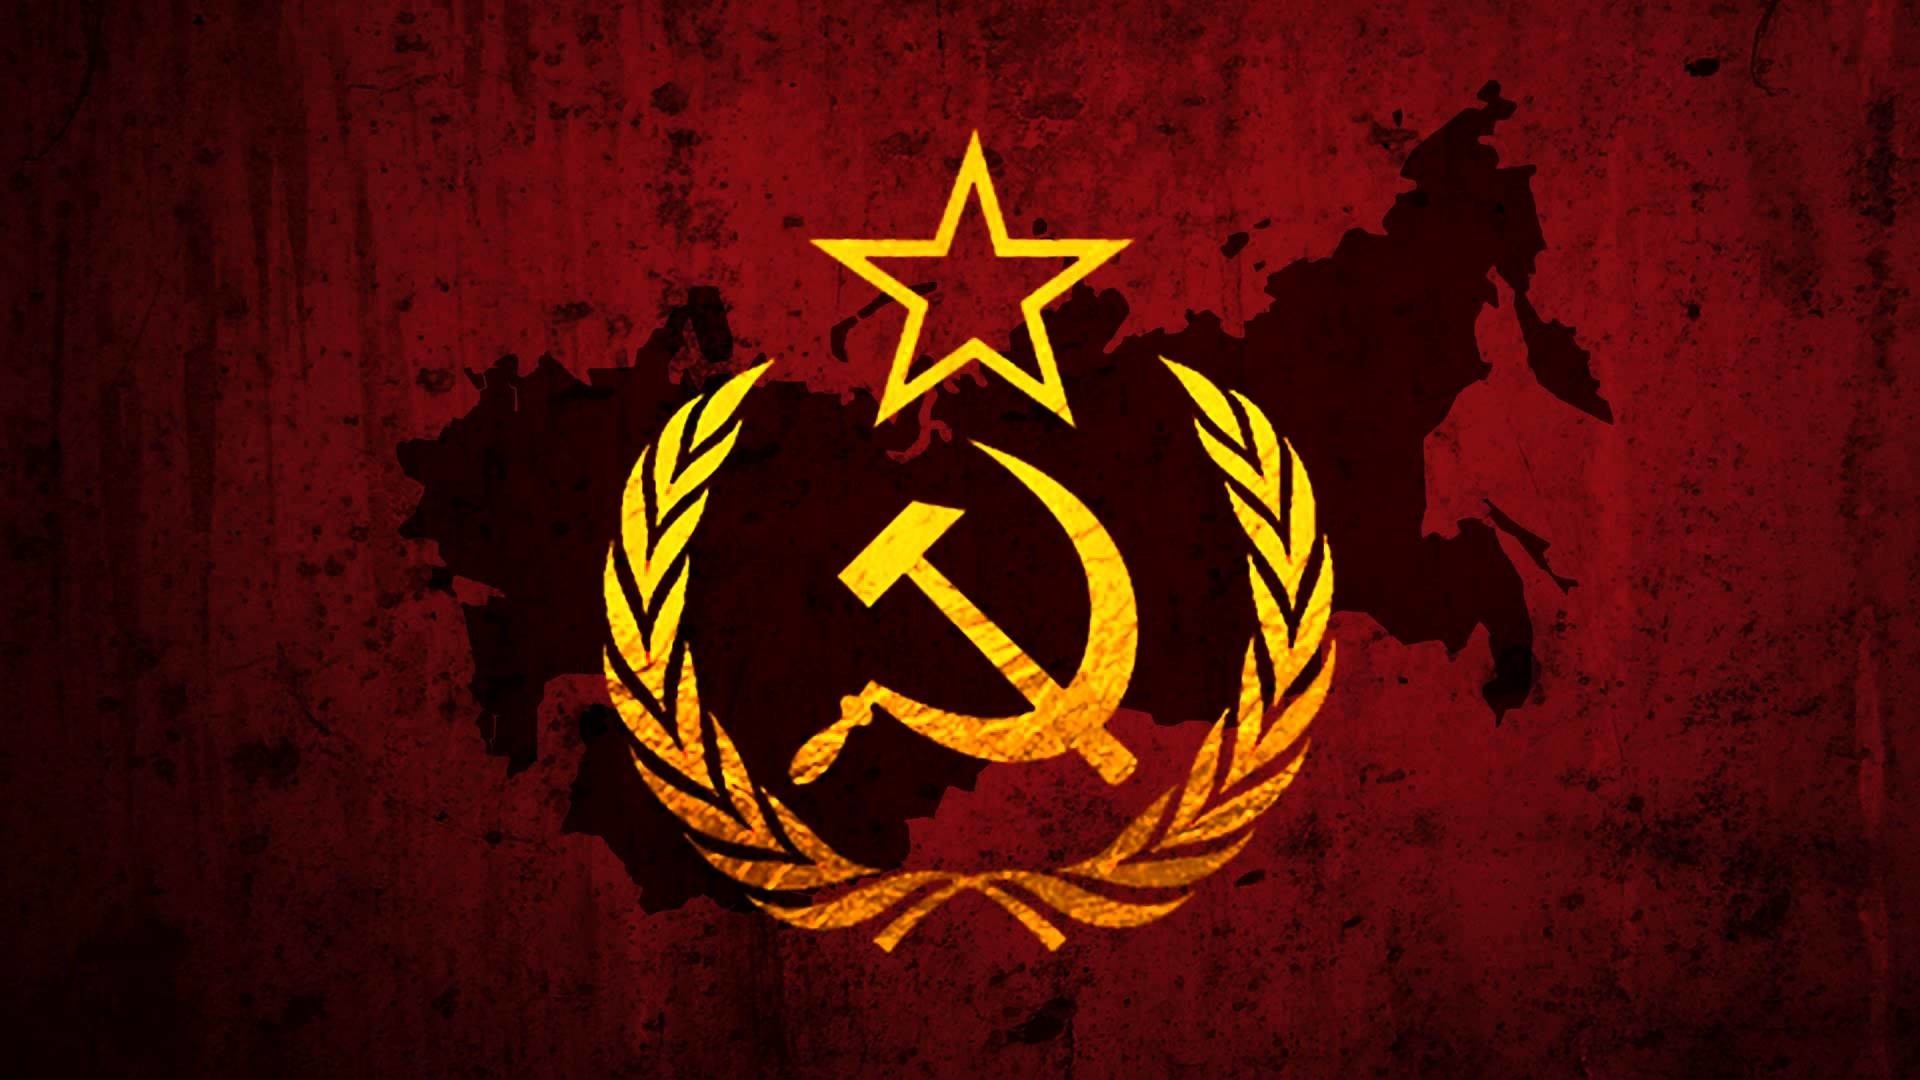 Soviet Union Cccp Images Red Army Flag Hd Wallpaper - Flag - HD Wallpaper 